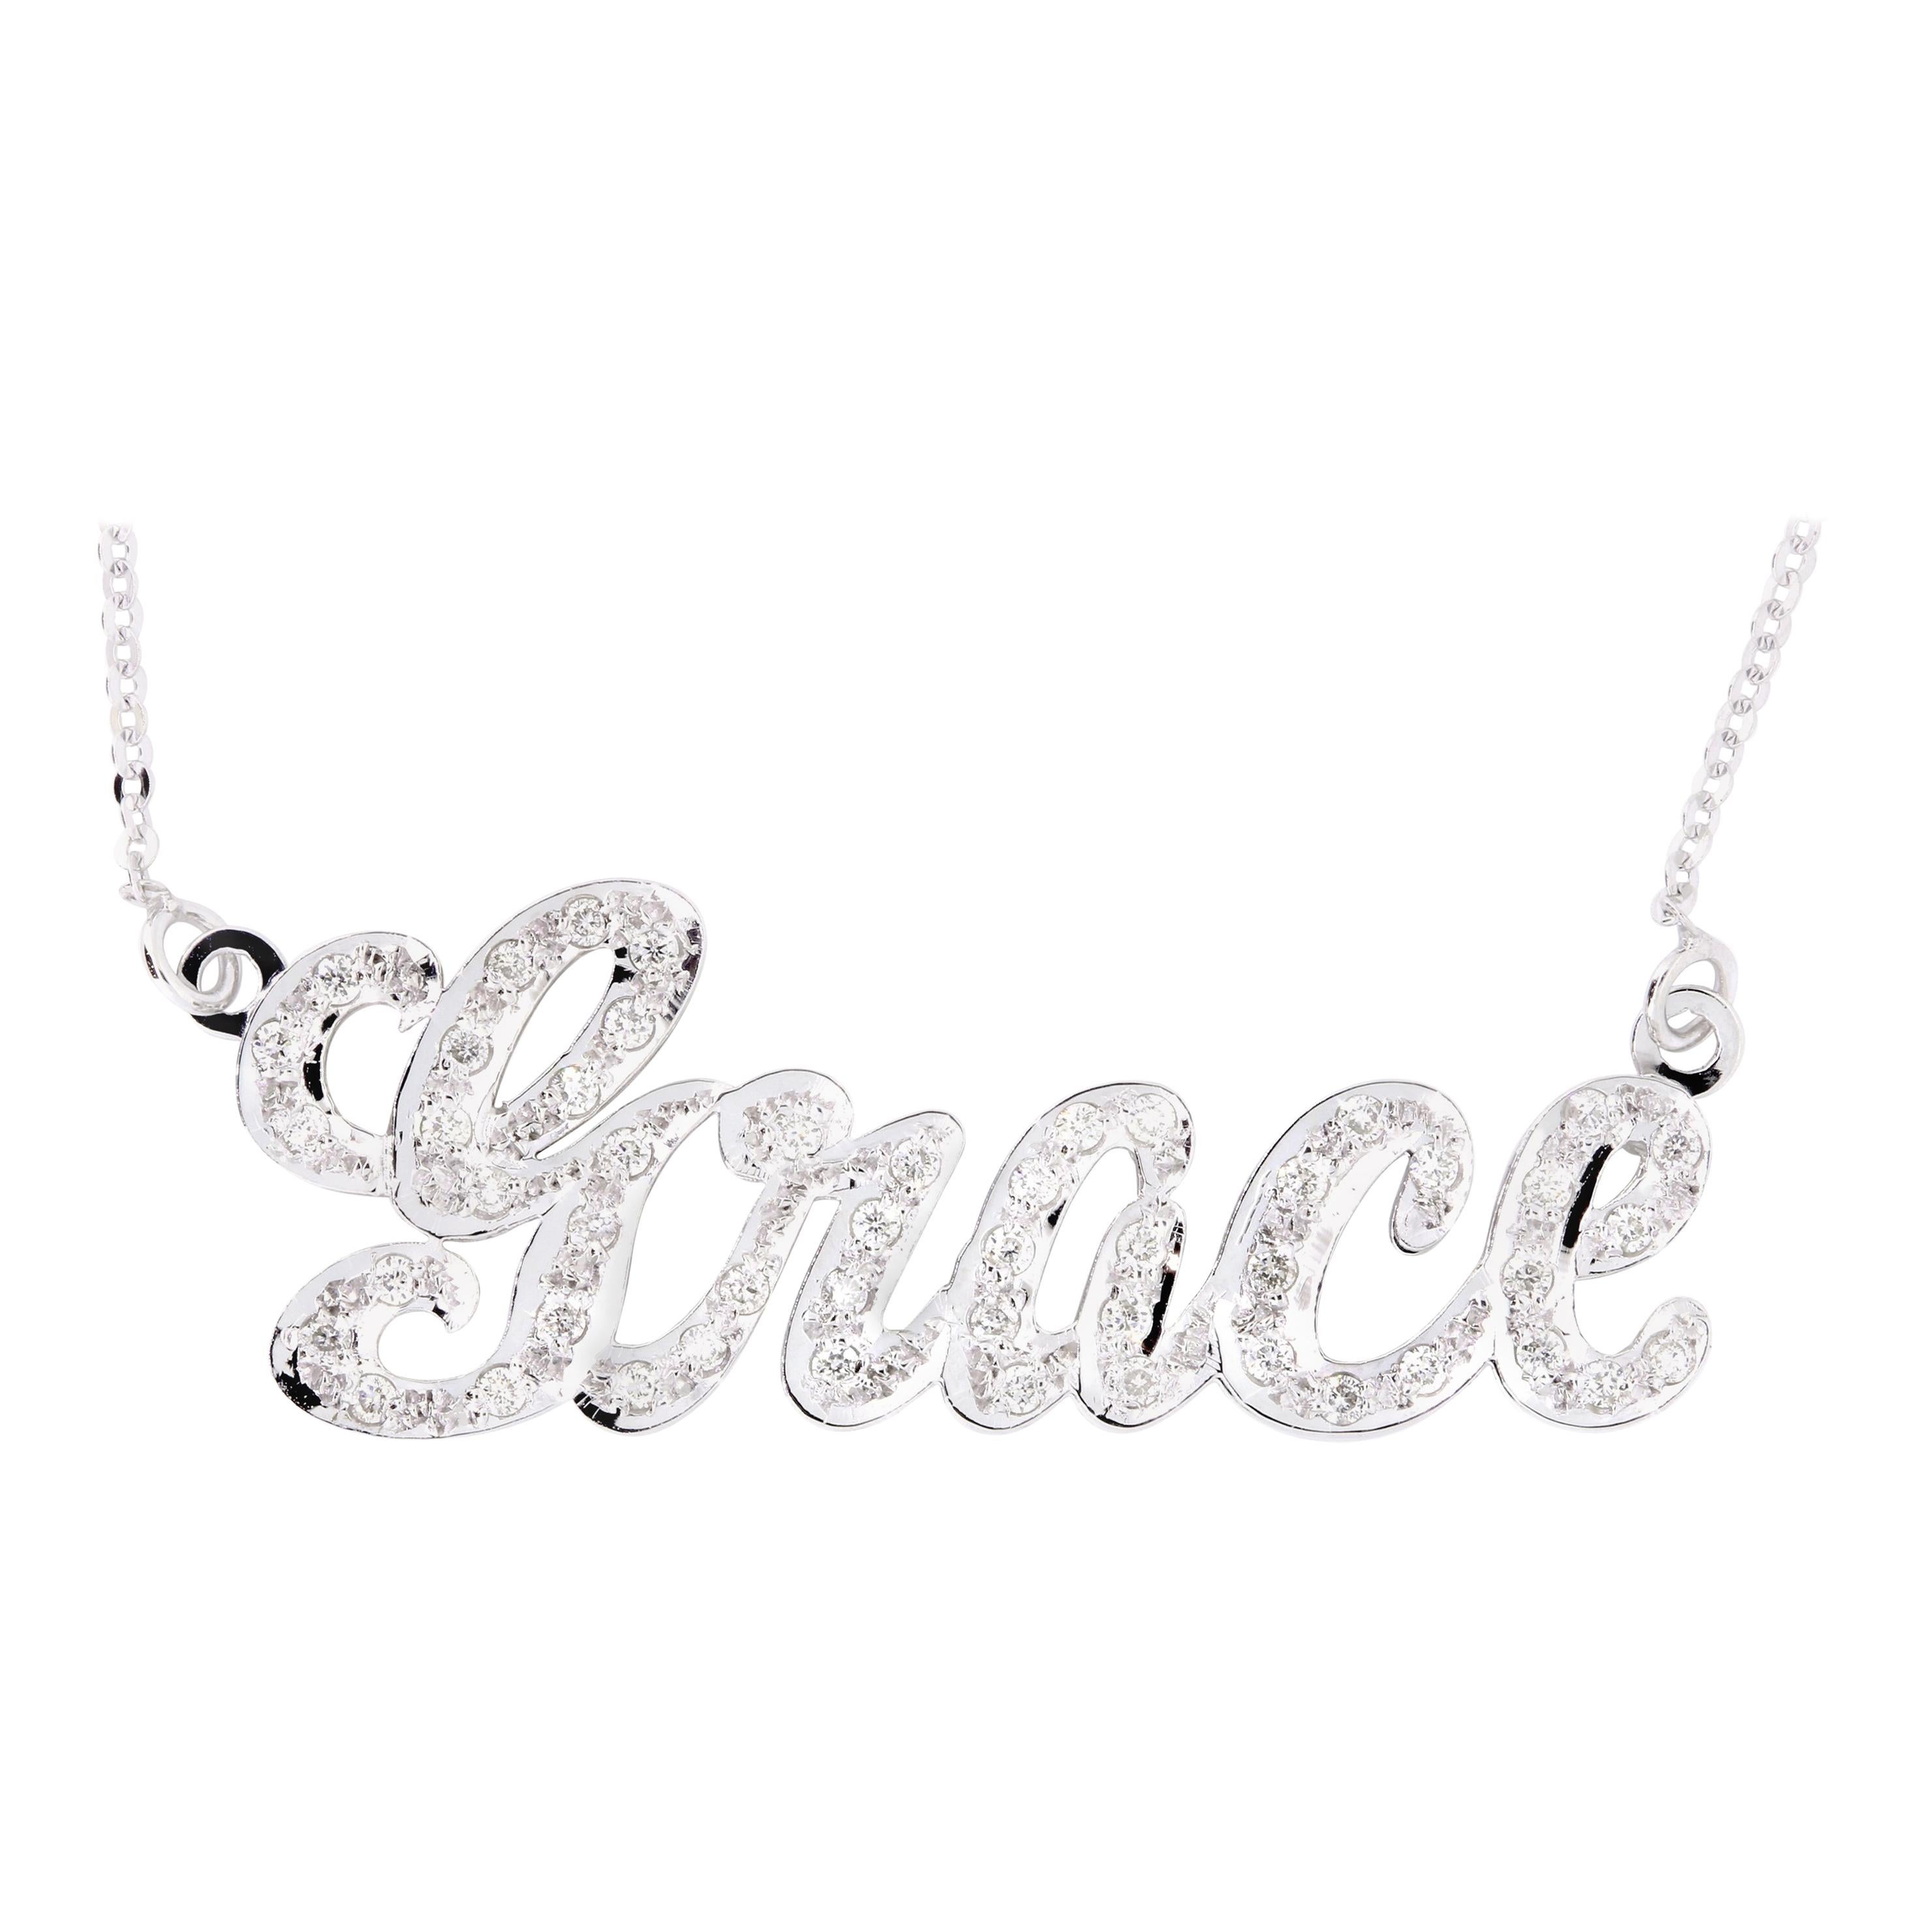 Personalized Customizable Round Diamond Nameplate Name Letter Necklace Pendant 